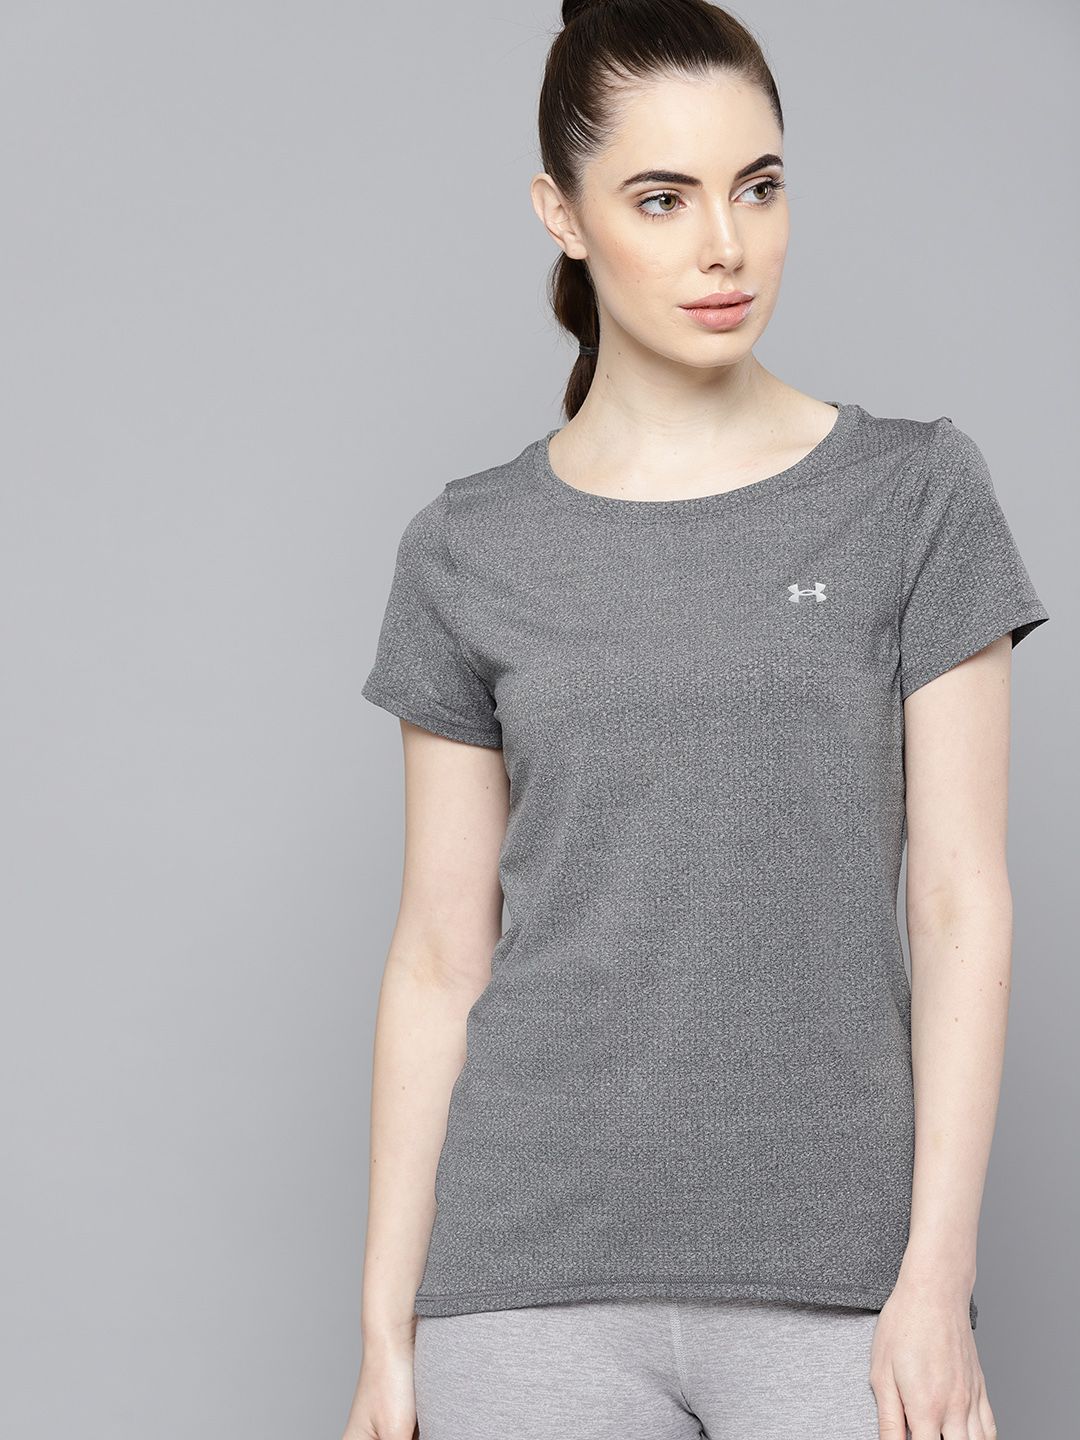 UNDER ARMOUR Women Charcoal Grey Solid HeatGear T-shirt Price in India